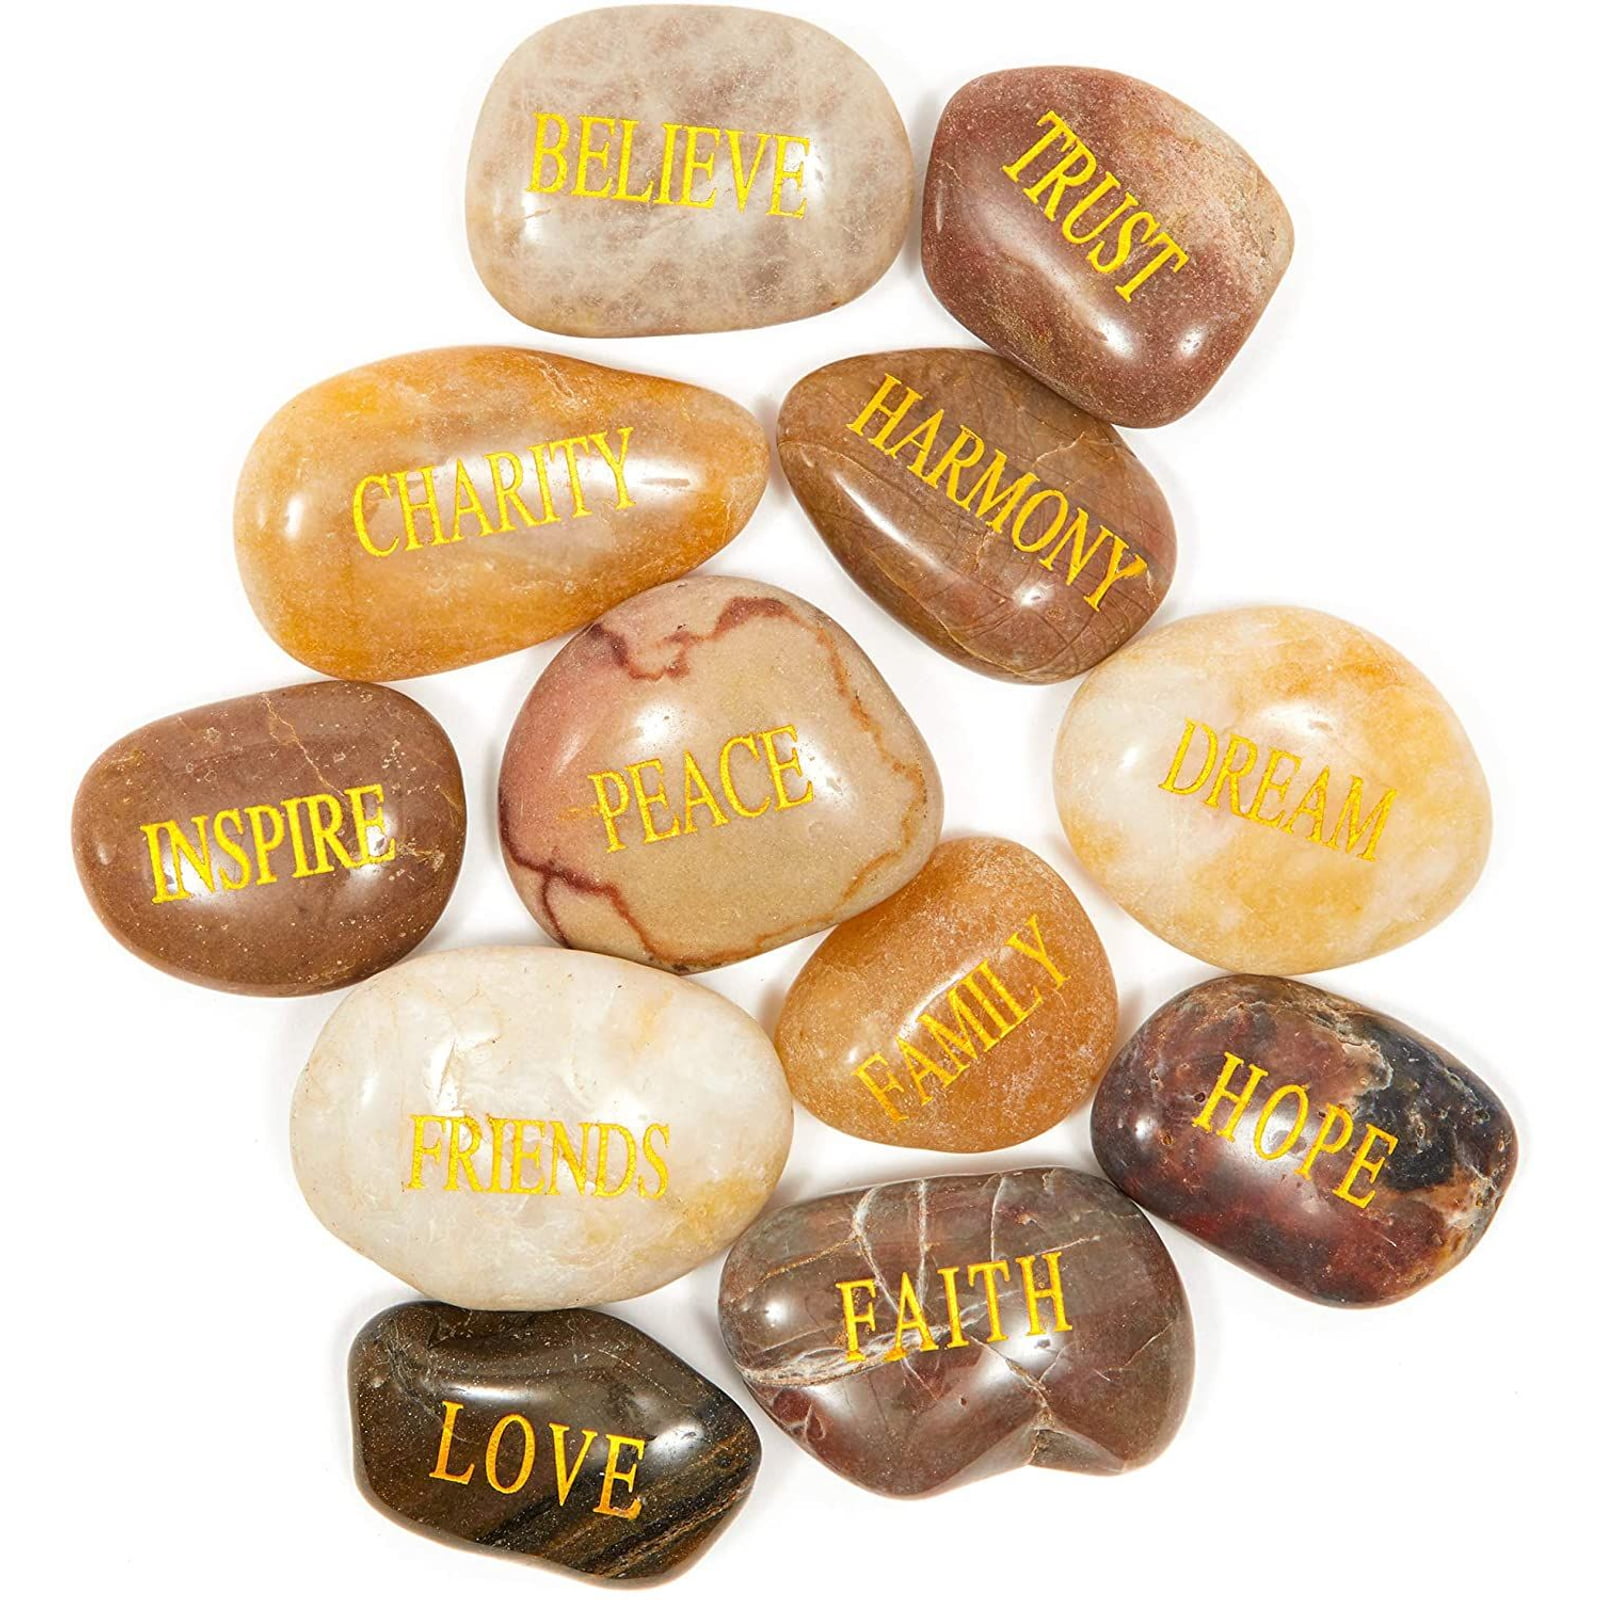 Engraved Stones with Inspirational Words River Rocks 